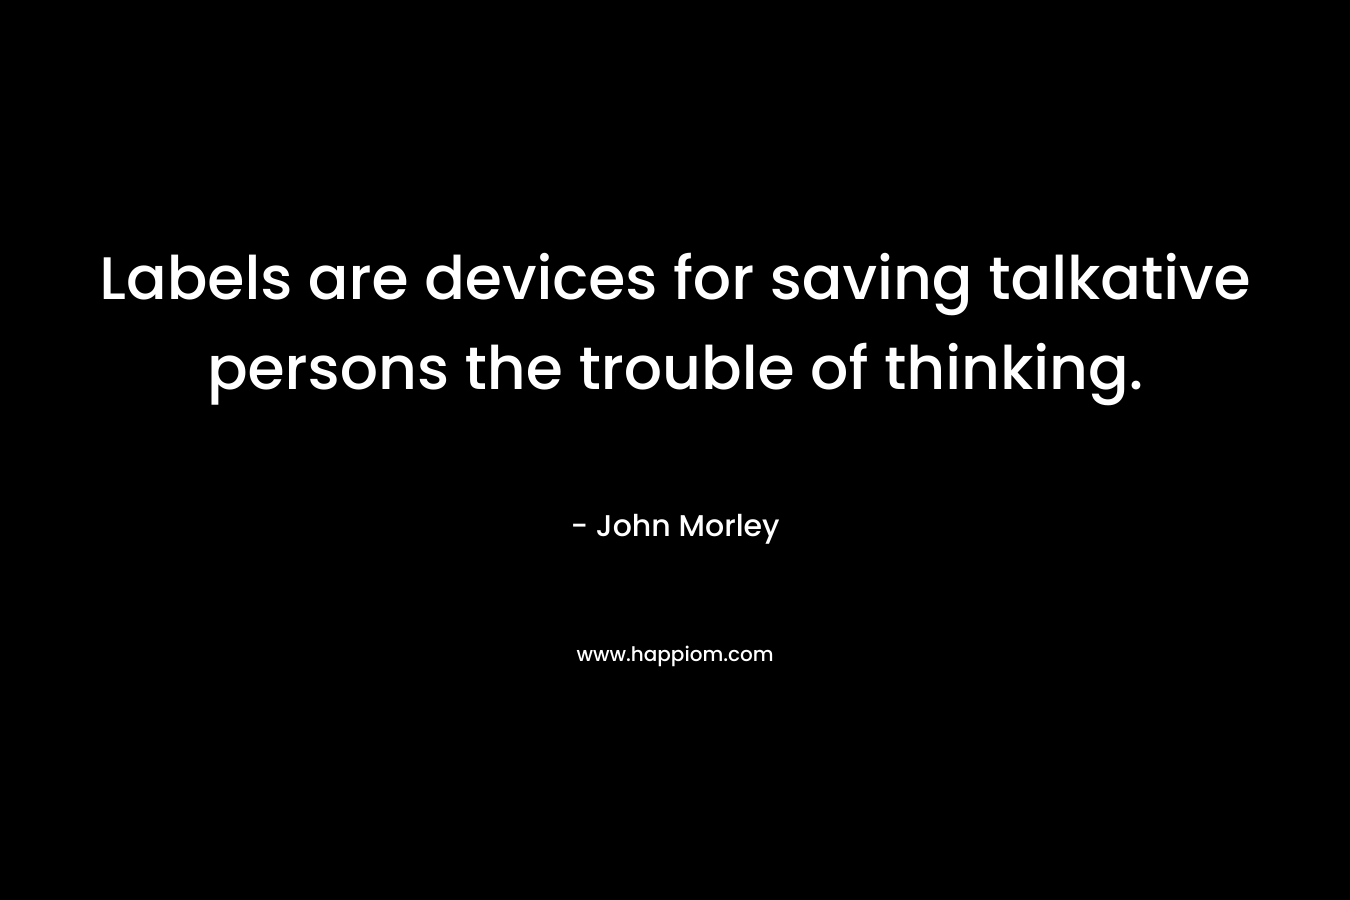 Labels are devices for saving talkative persons the trouble of thinking.